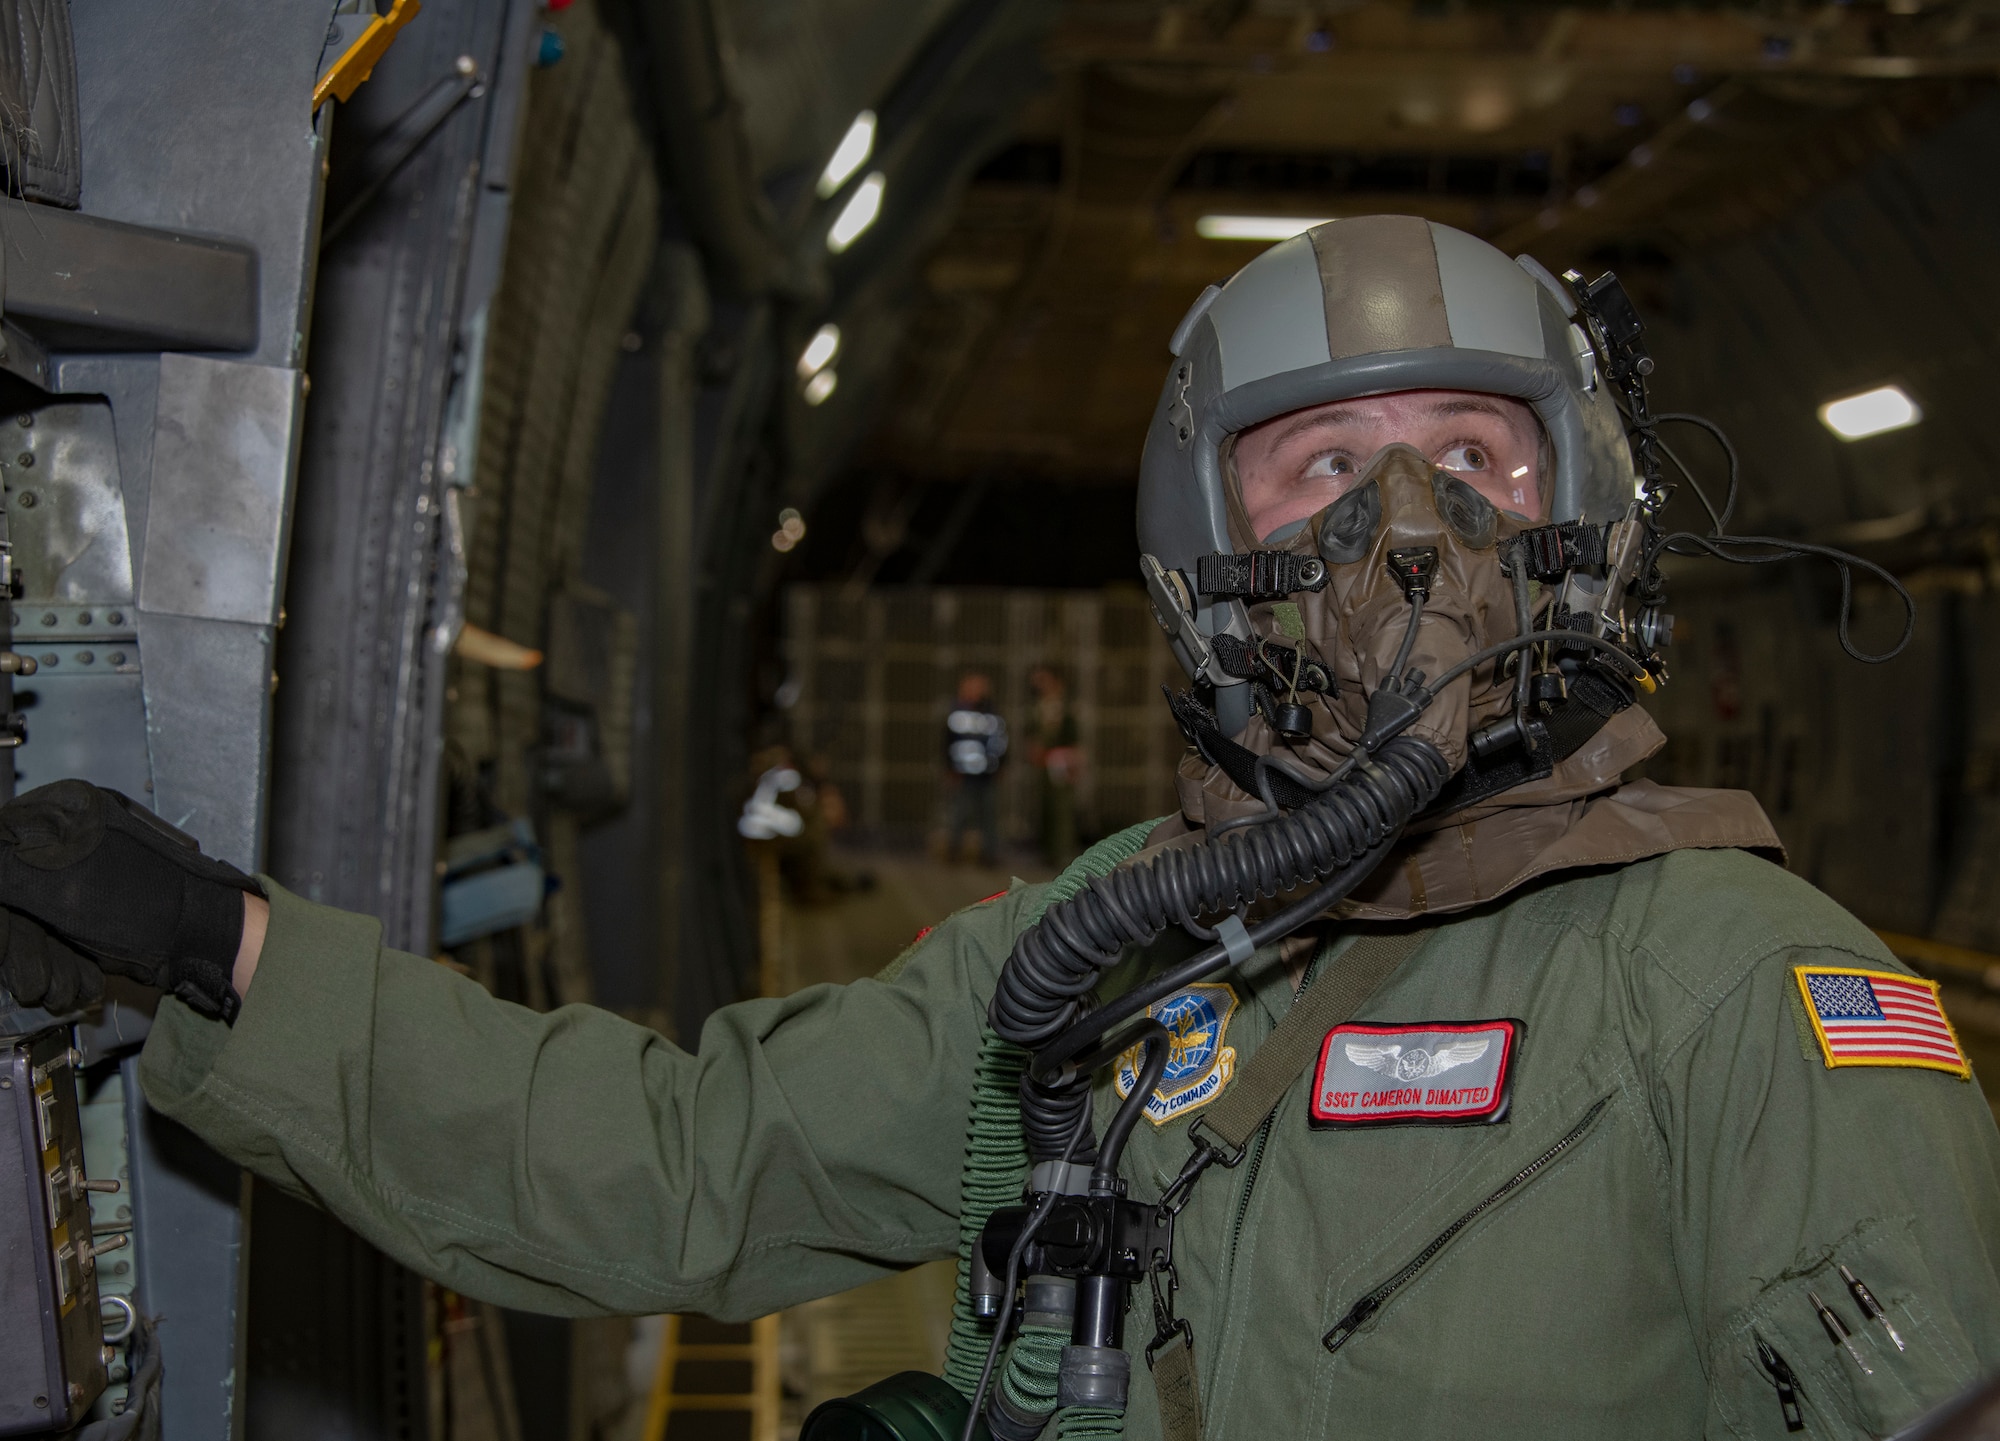 U.S. Air Force Staff Sgt. Cameron Dimatteo, 22nd Airlift Squadron loadmaster, performs a preflight safety check aboard a C-5M Super Galaxy during an exercise Nov. 18, 2020, at Travis Air Force Base, California. Airmen at Travis AFB participate in readiness exercises to ensure they can operate in contested environments. (U.S. Air Force photo by Heide Couch)